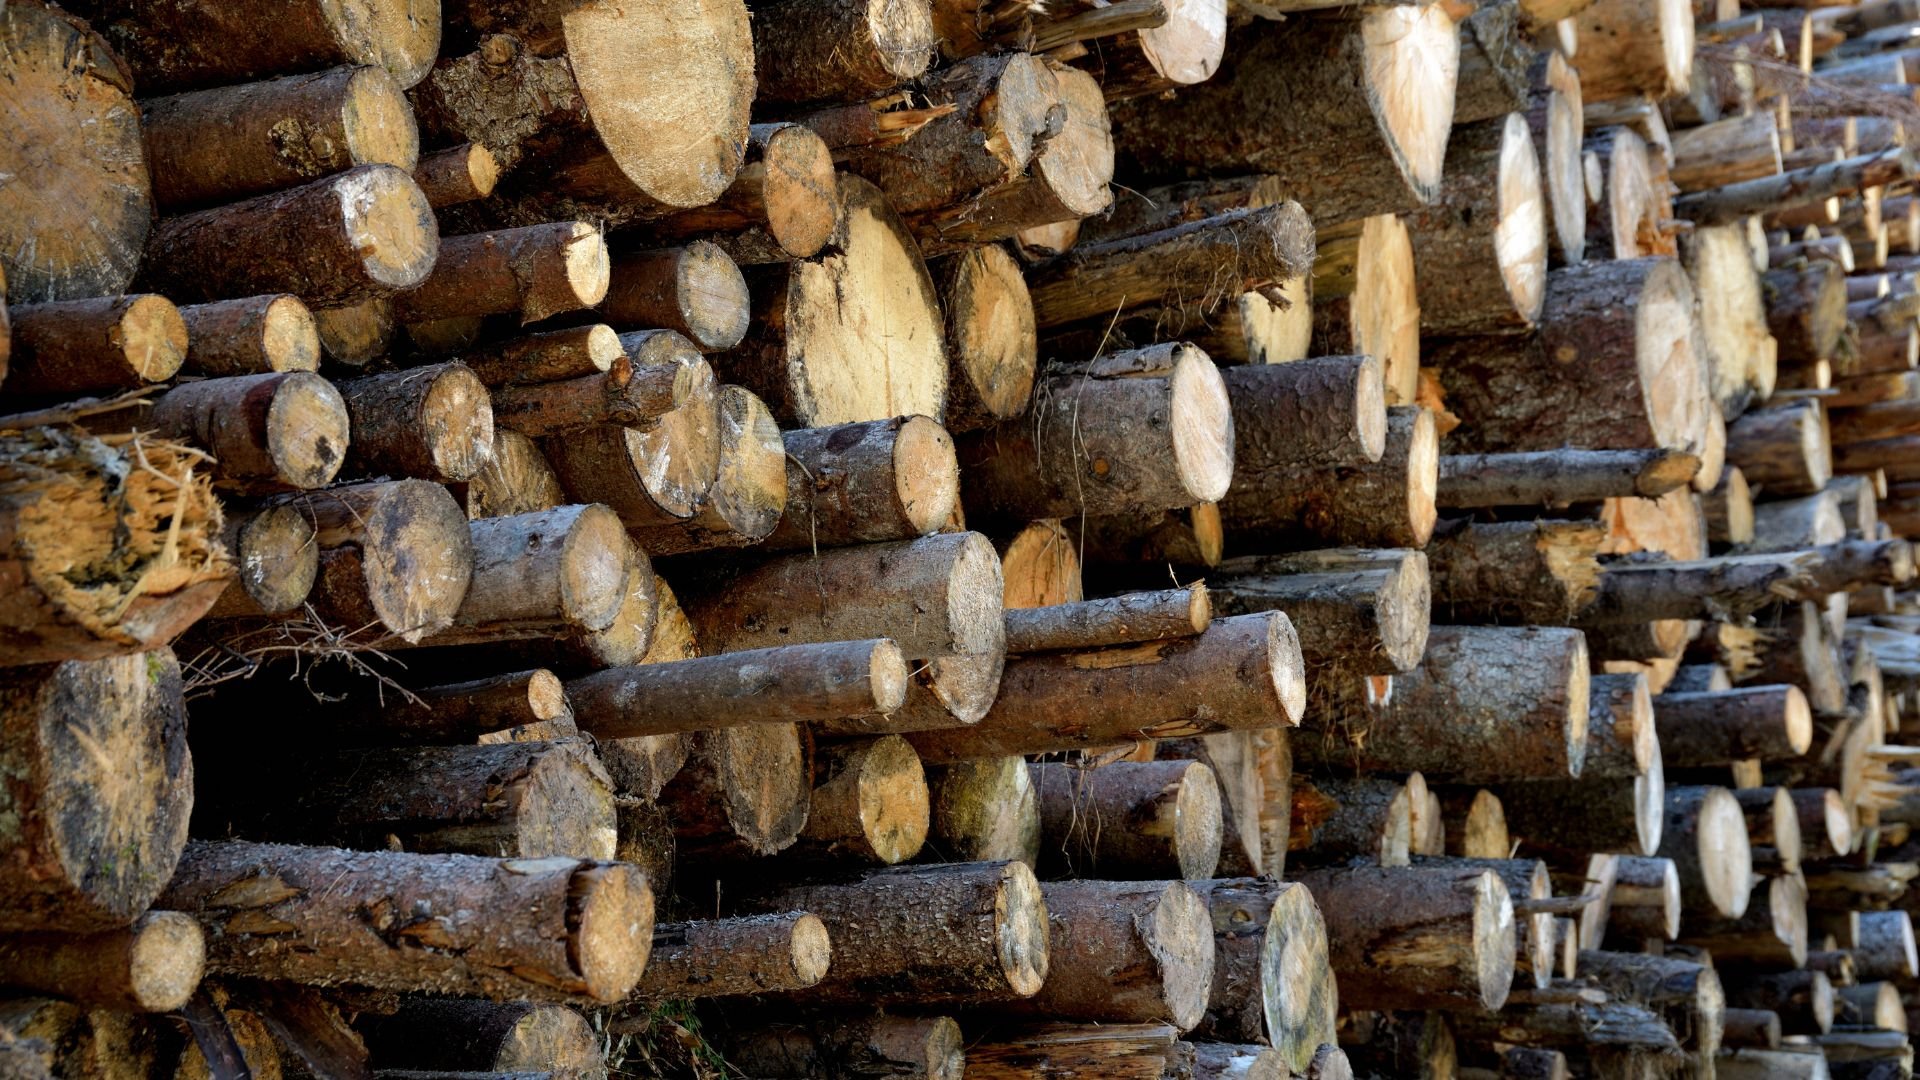 Forestry Products